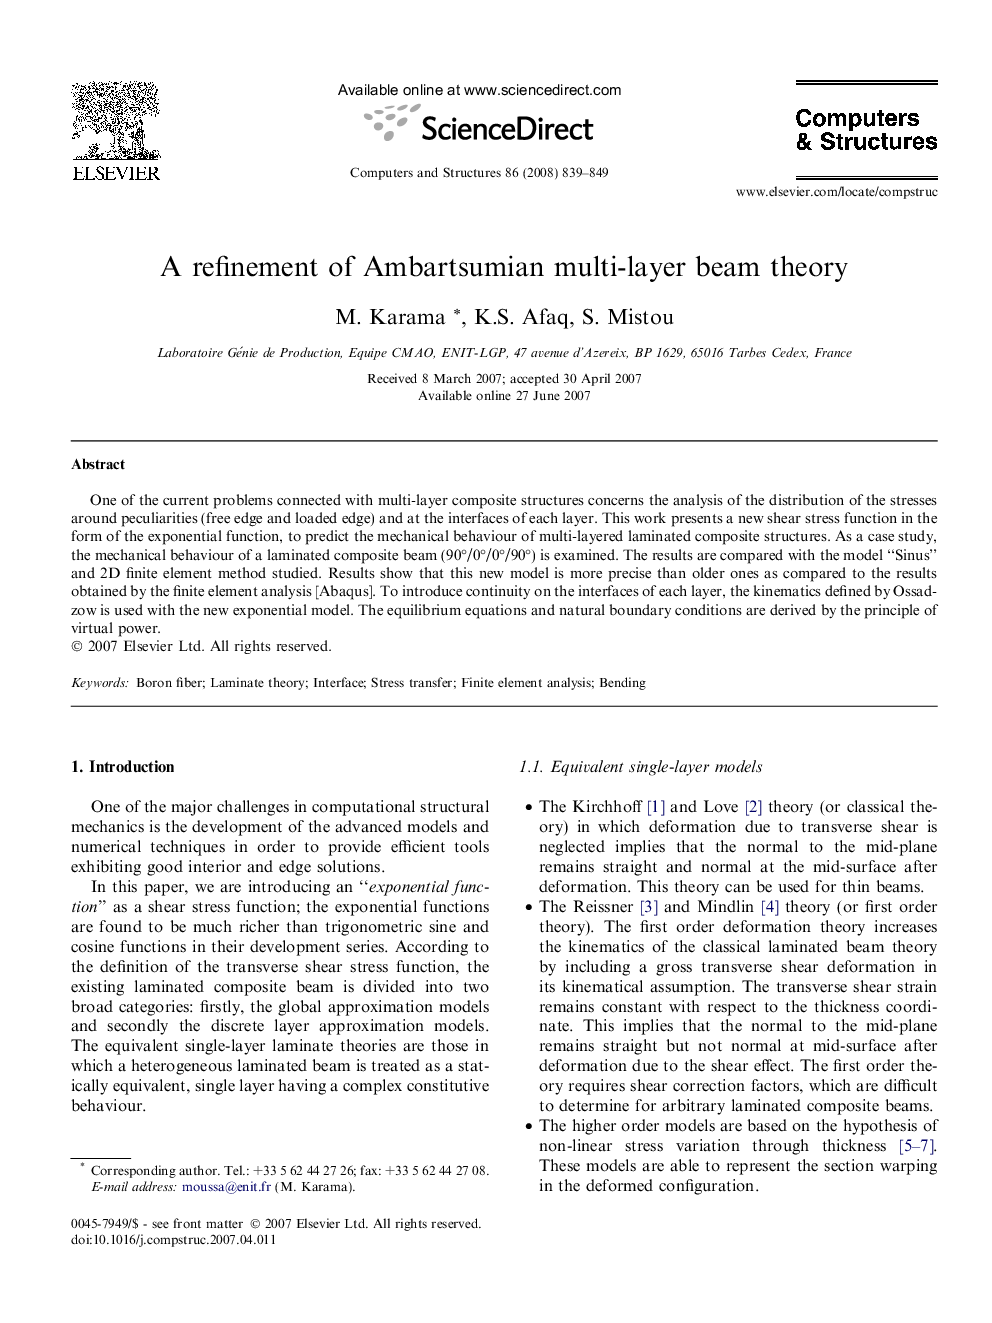 A refinement of Ambartsumian multi-layer beam theory